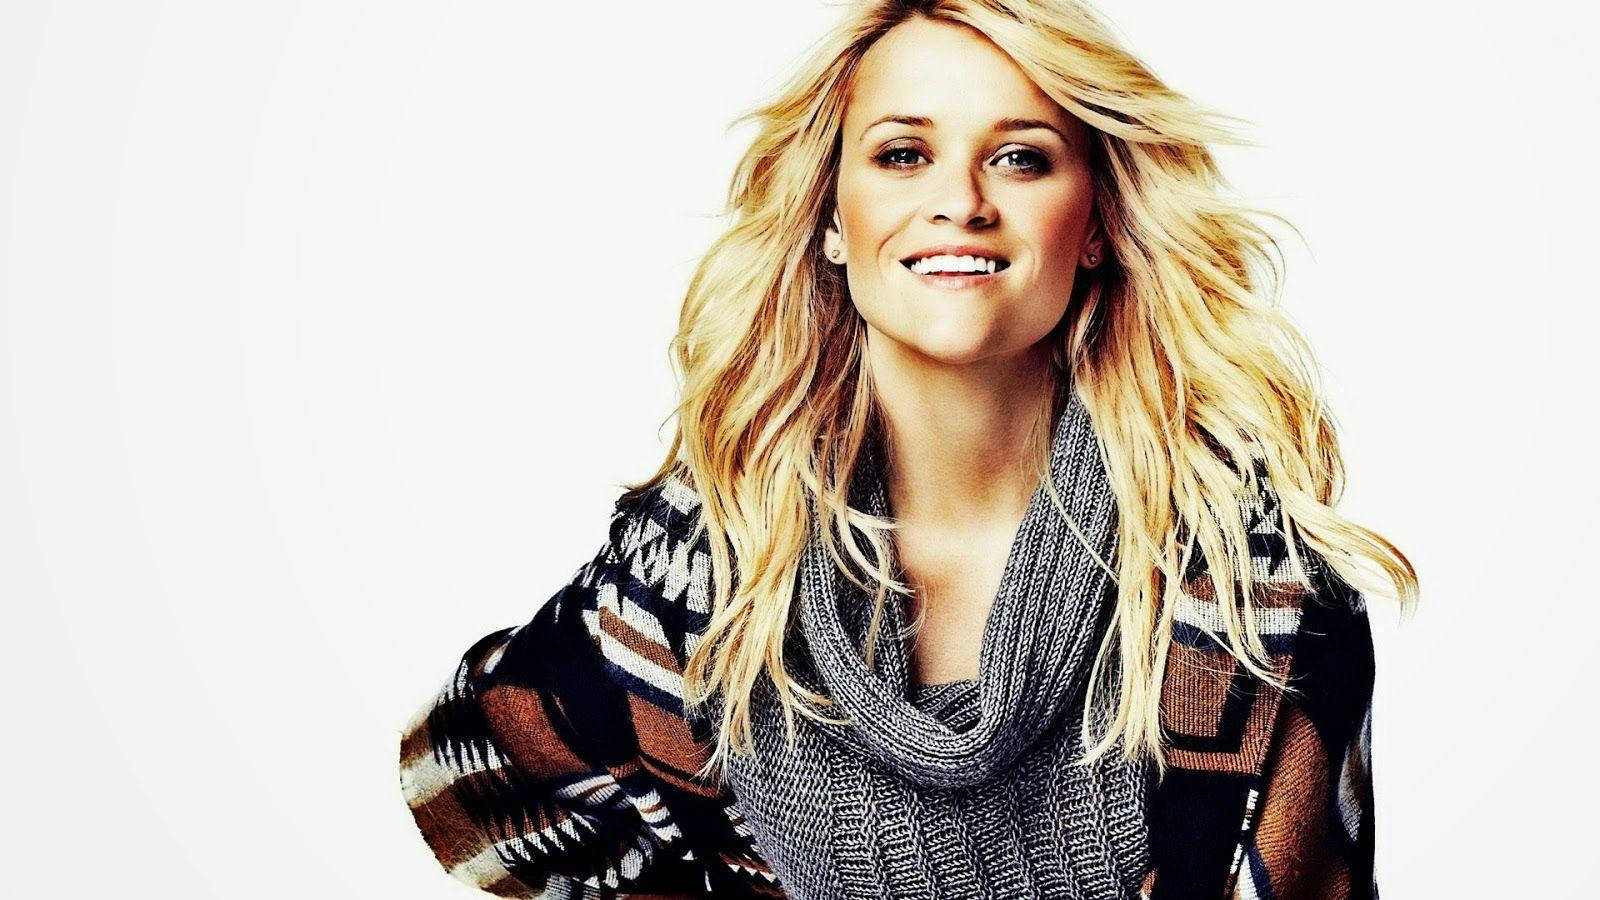 Reese Witherspoon Winter Outfit Wallpaper